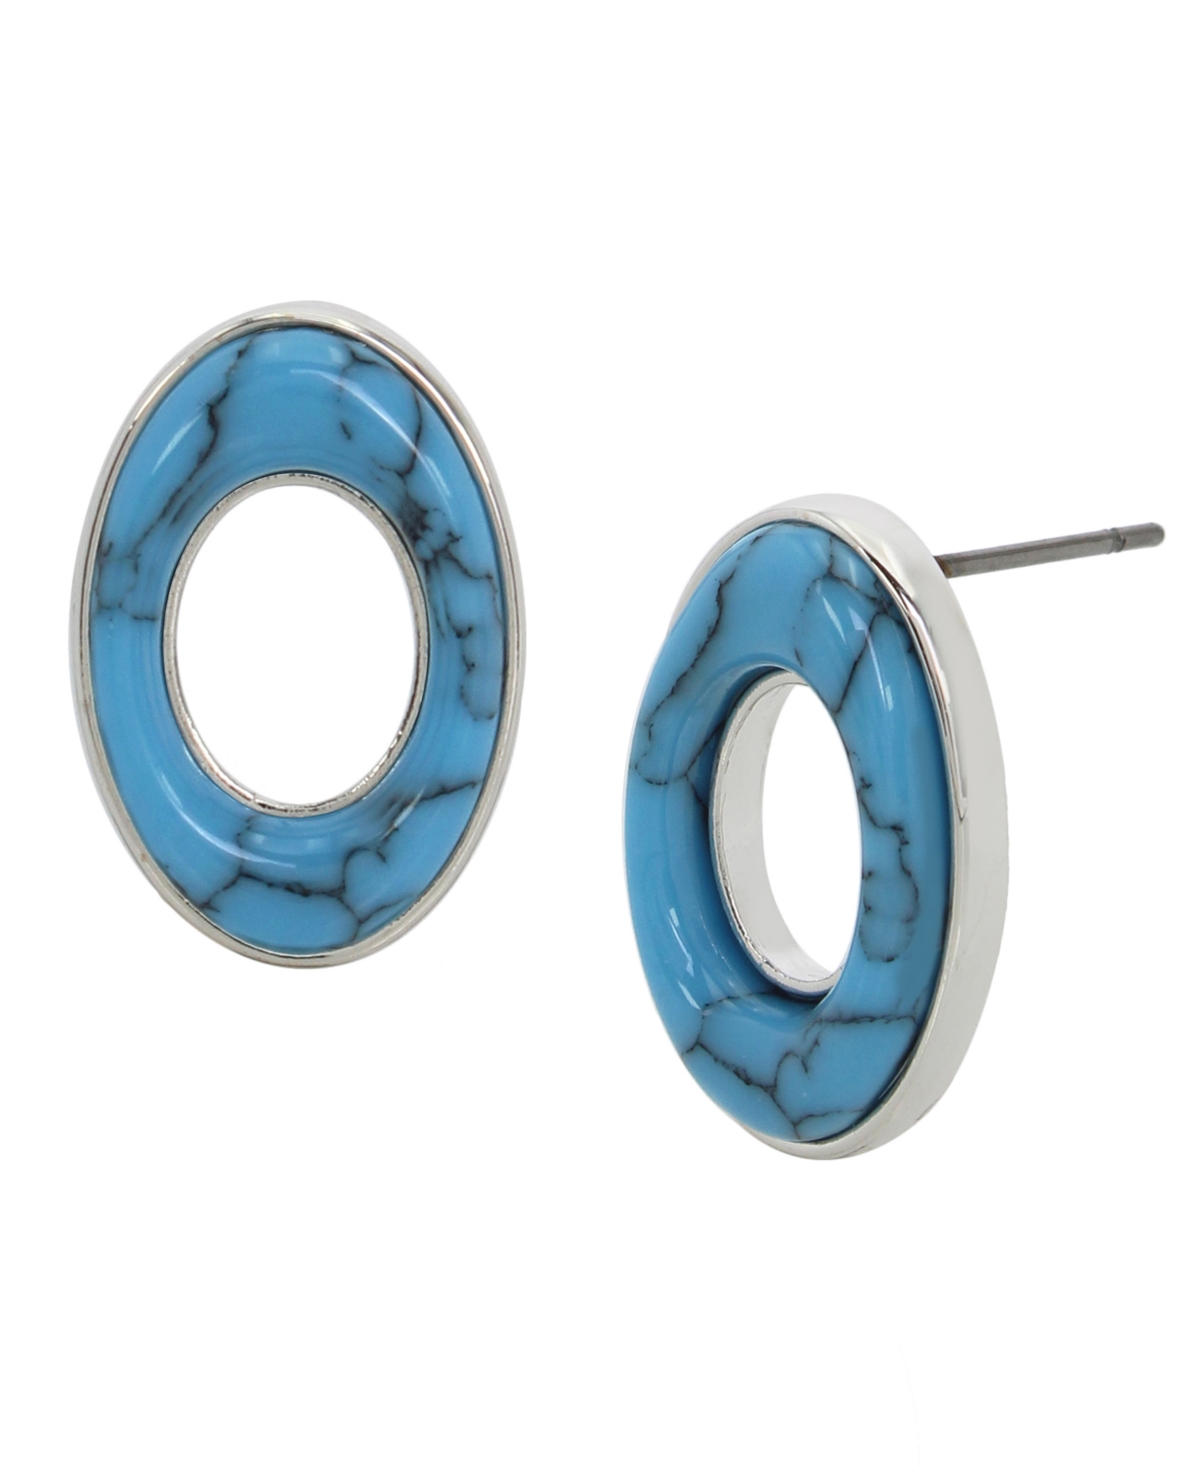 Semi-Precious Turquoise Oval Stud Earrings - Turquoise, Silver